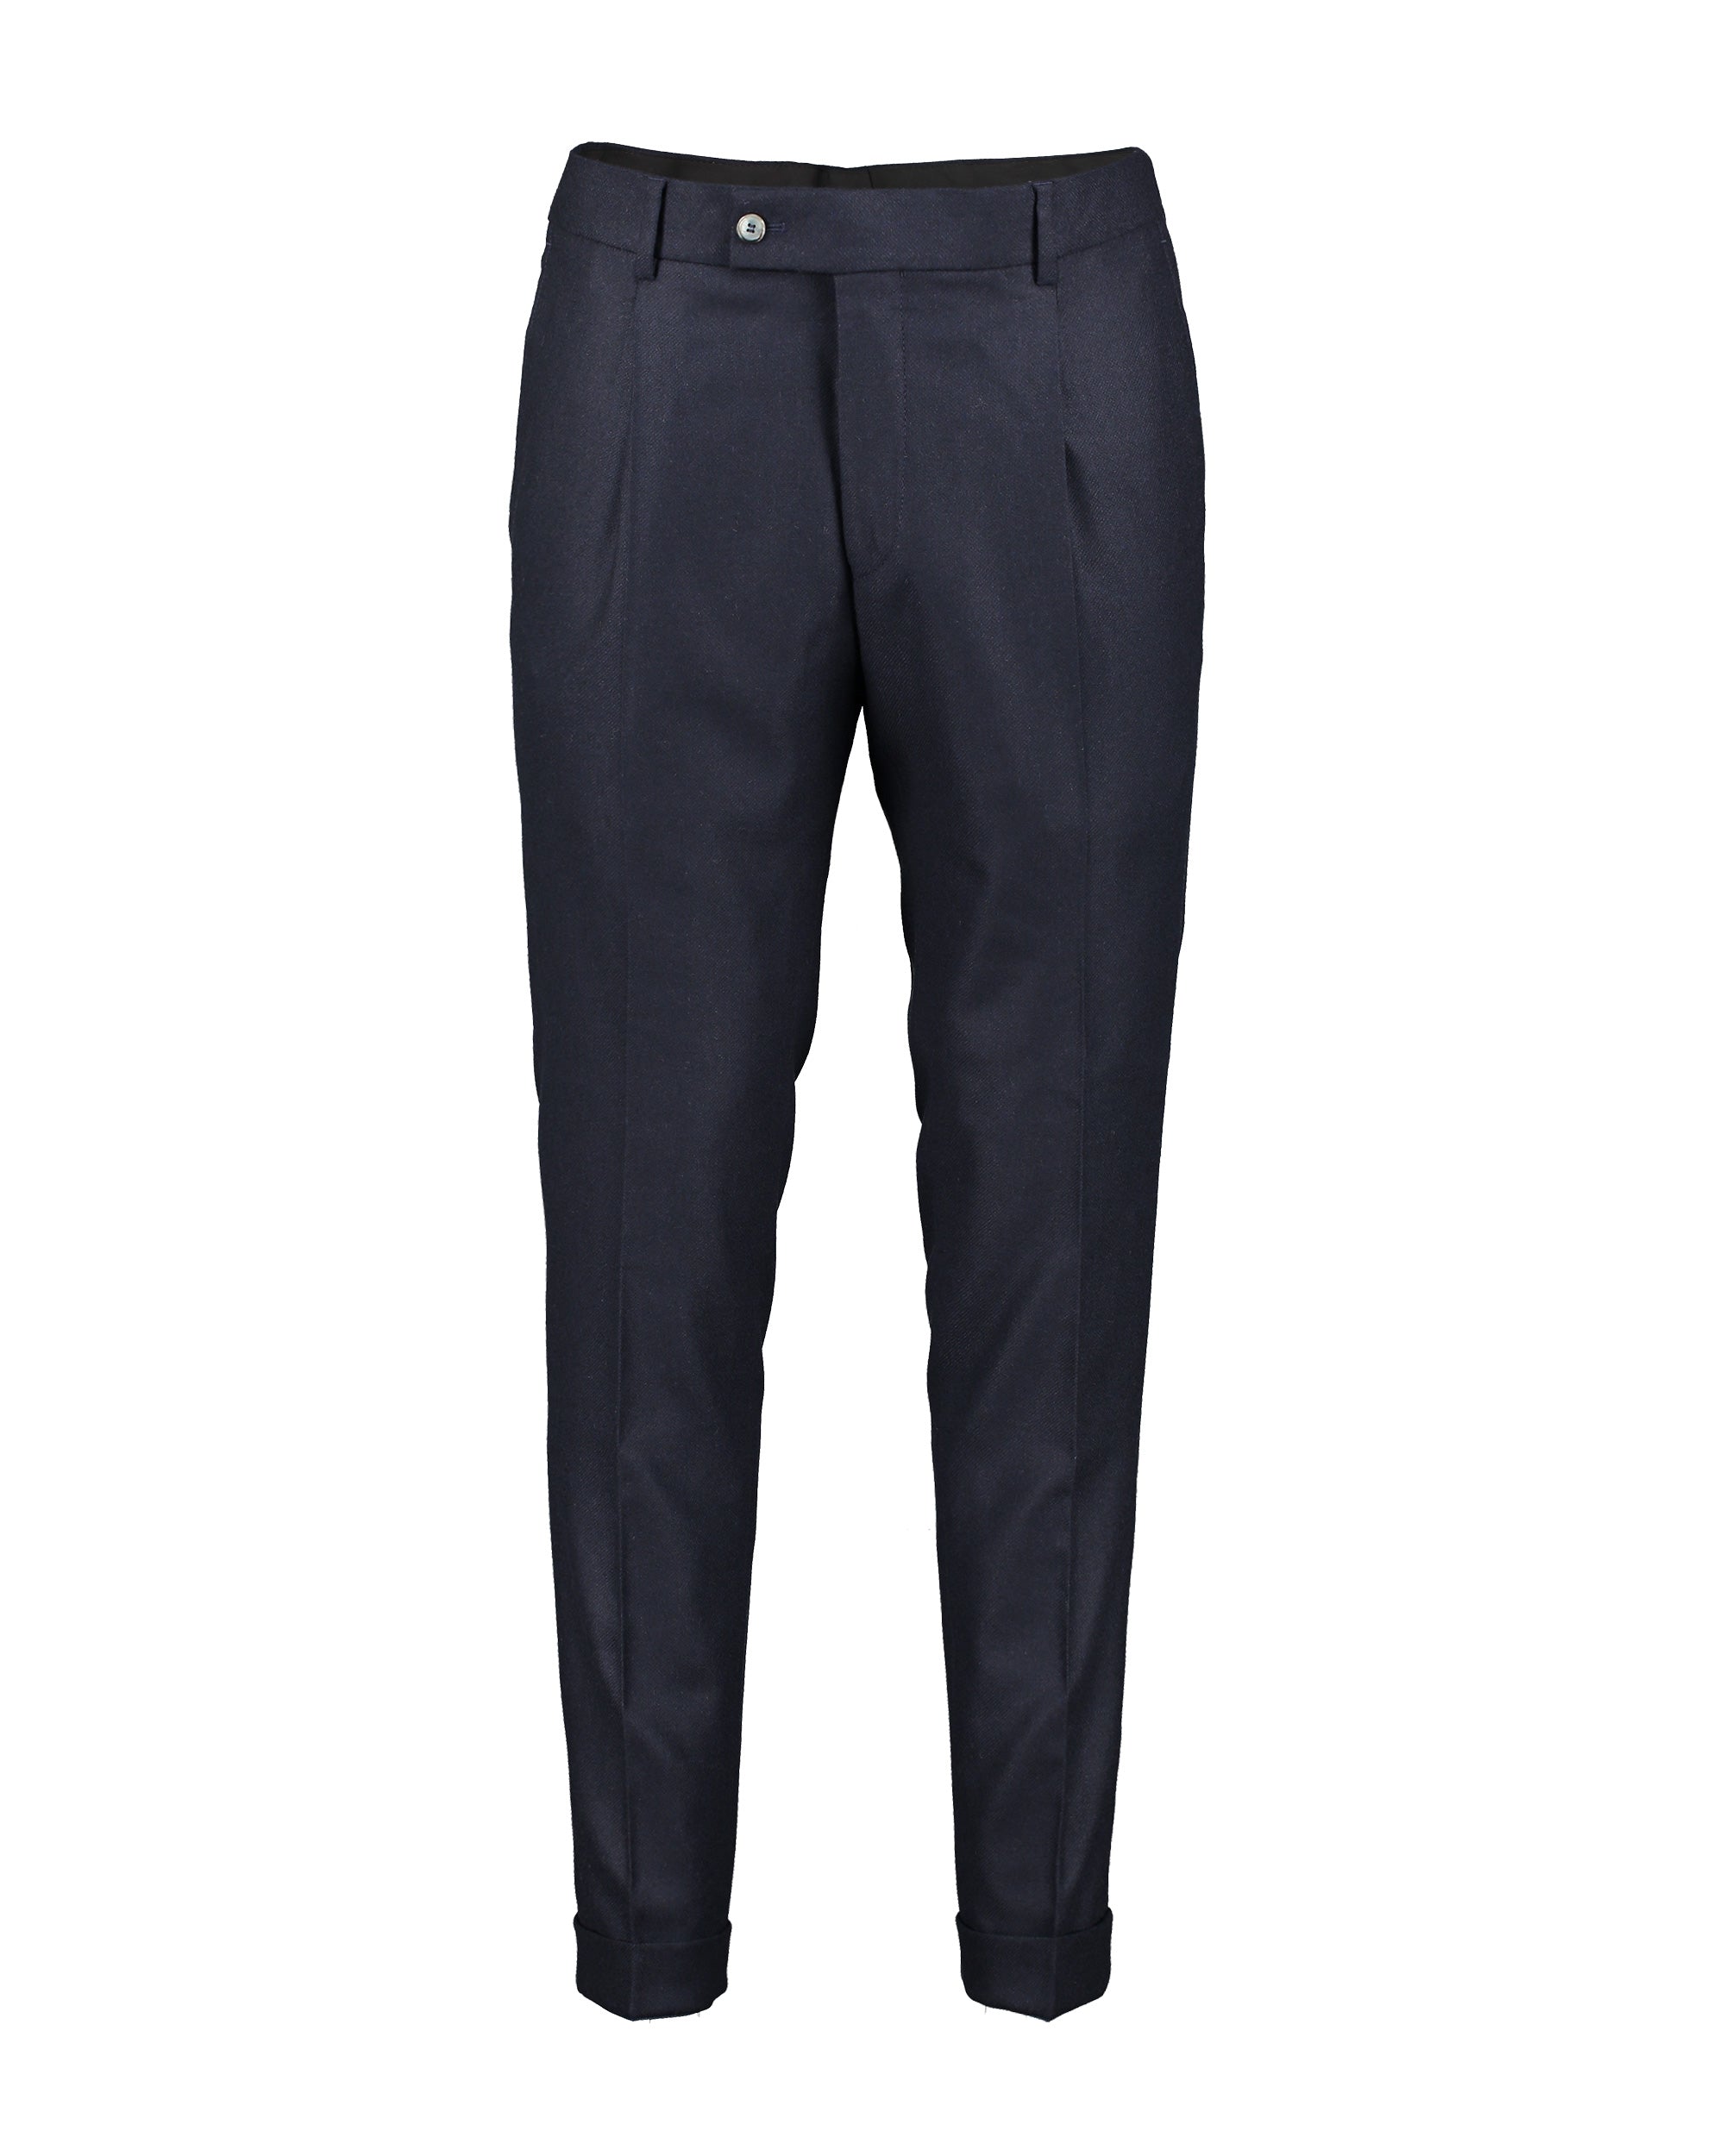 Alex Navy Flannel Trousers